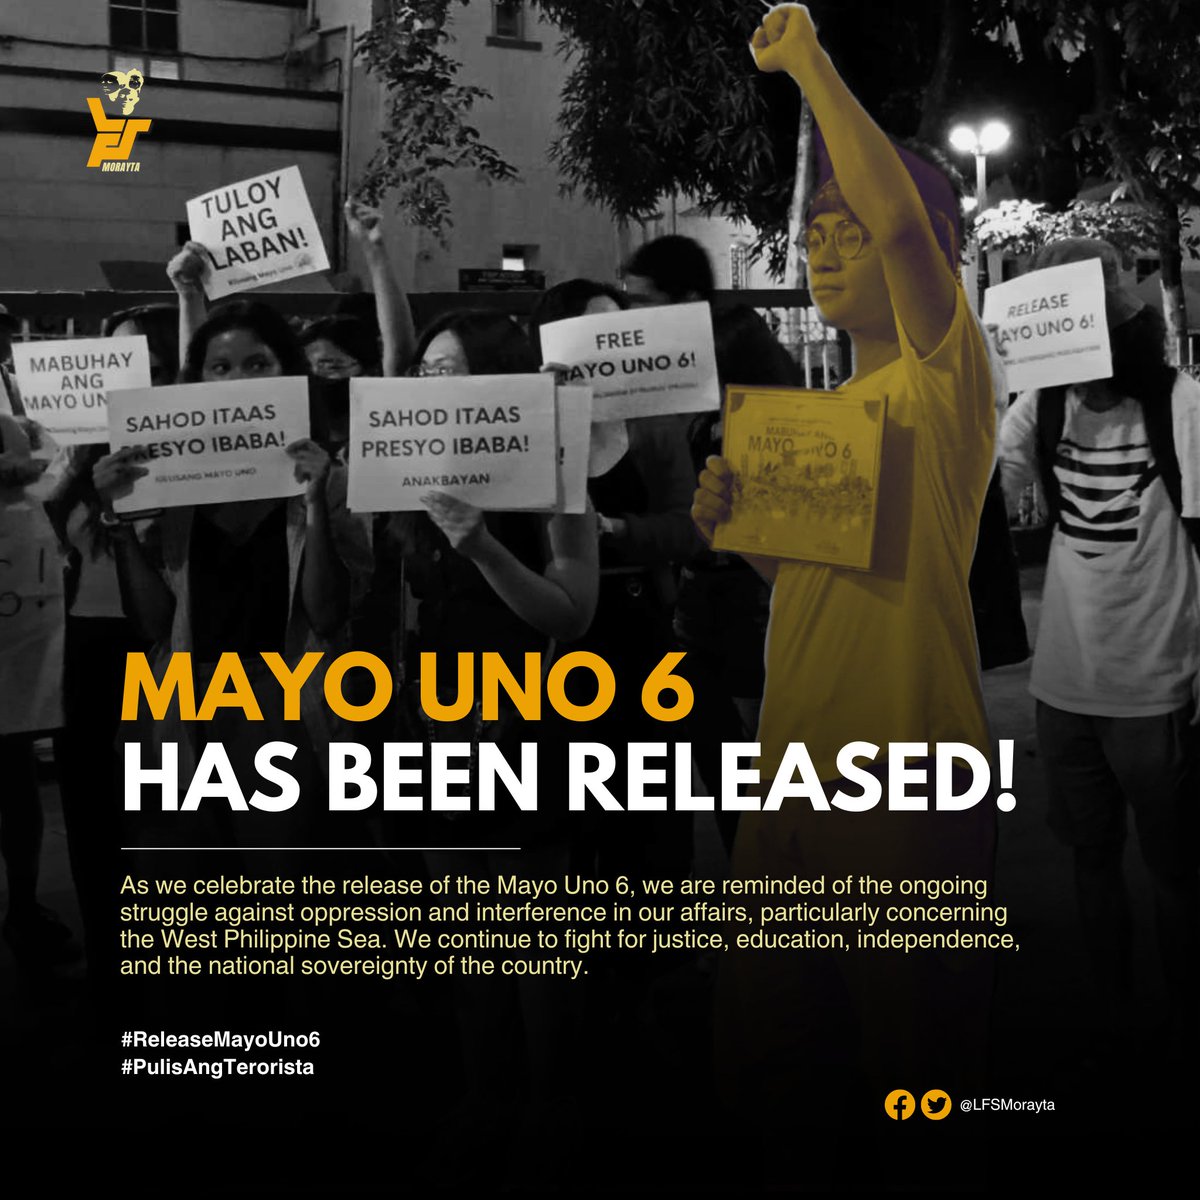 UPDATE: MAYO UNO 6 HAS BEEN RELEASED!

The League of Filipino Students-Morayta welcomes the news of the release of the Mayo Uno 6, who, after enduring six days of undue detention, have successfully posted bail and rejoined their families. (1)

#ReleaseMayoUno6
#PulisAngTerorista